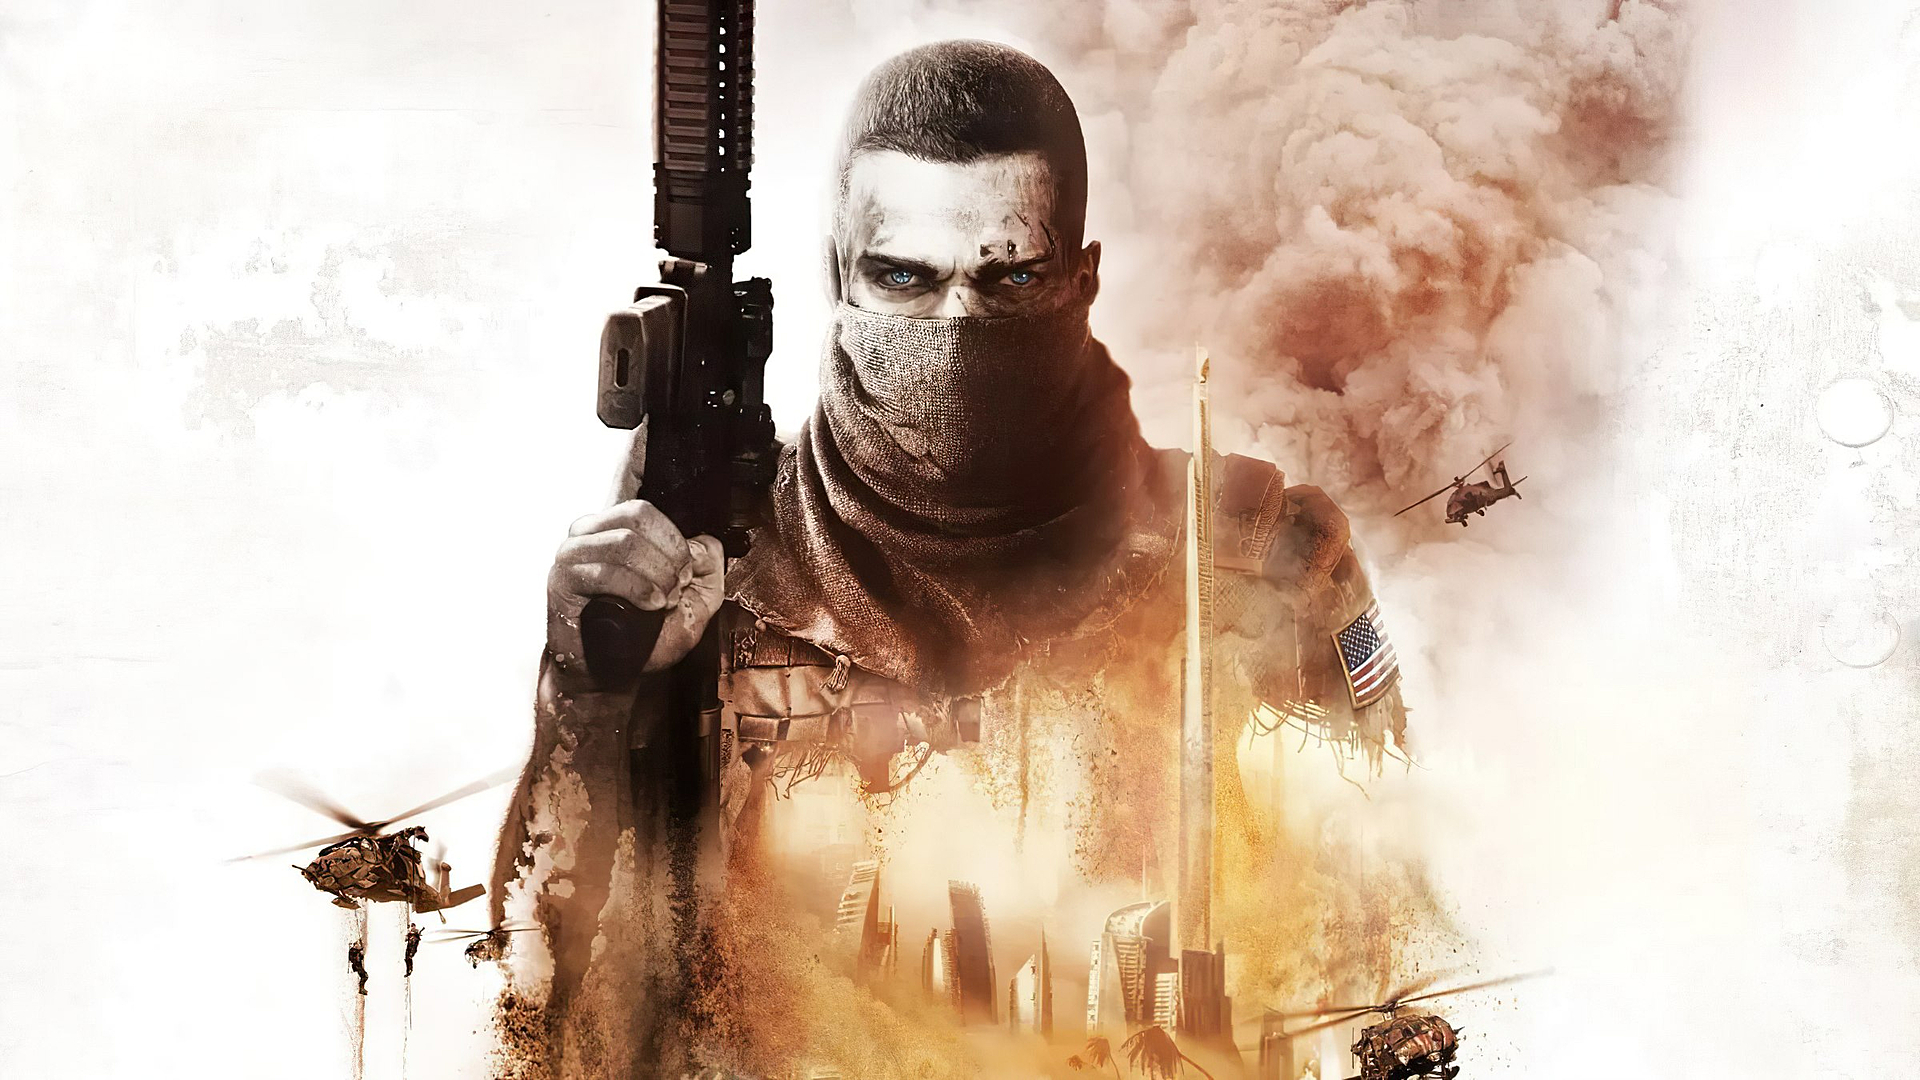 spec ops game